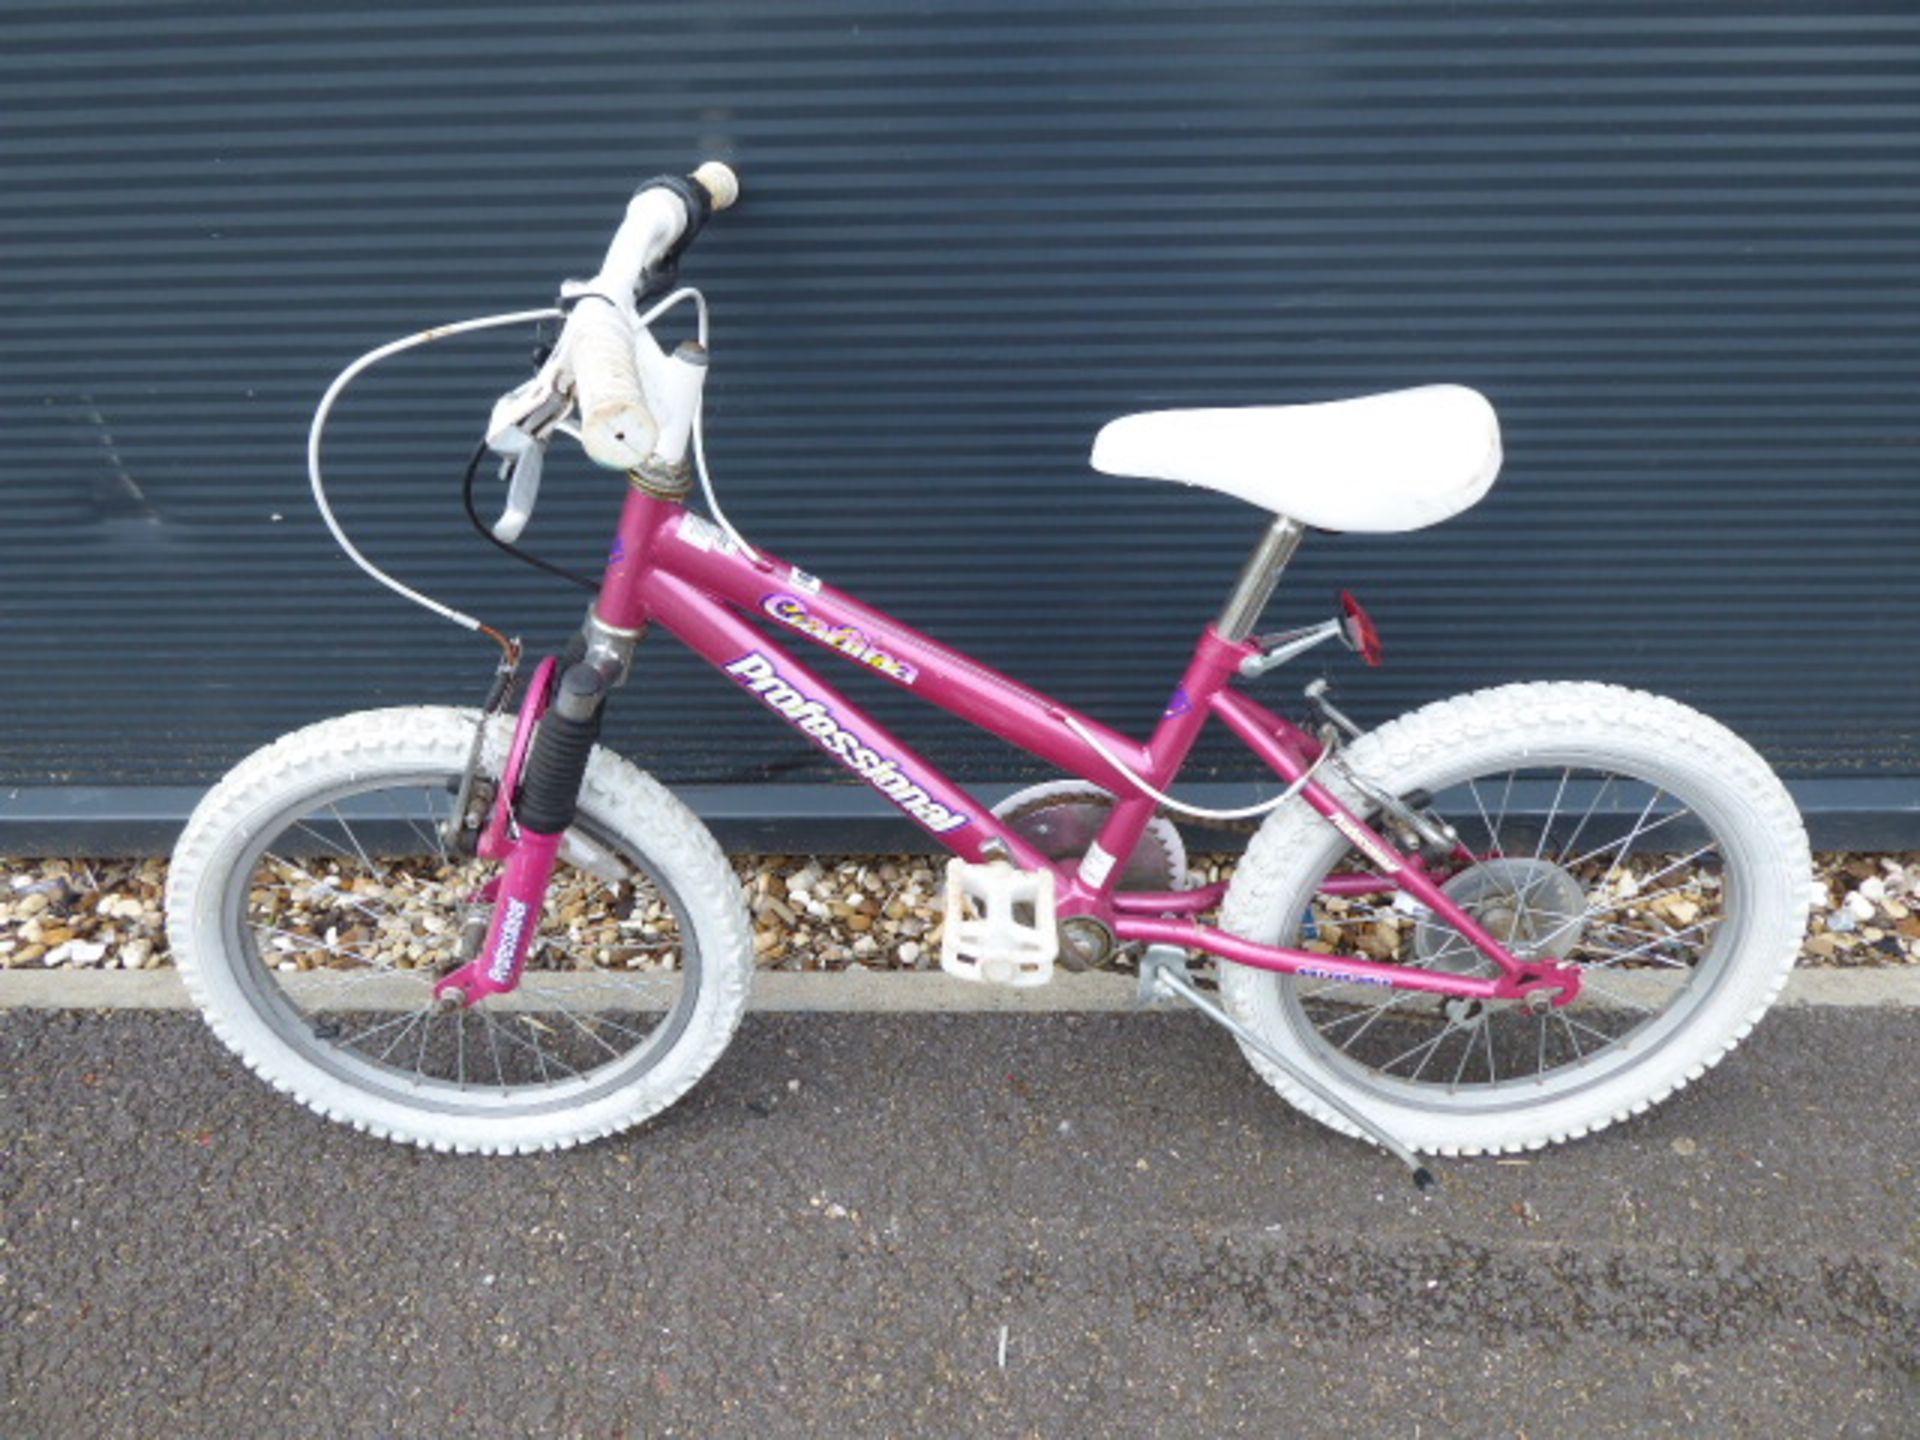 Small pink child's cycle